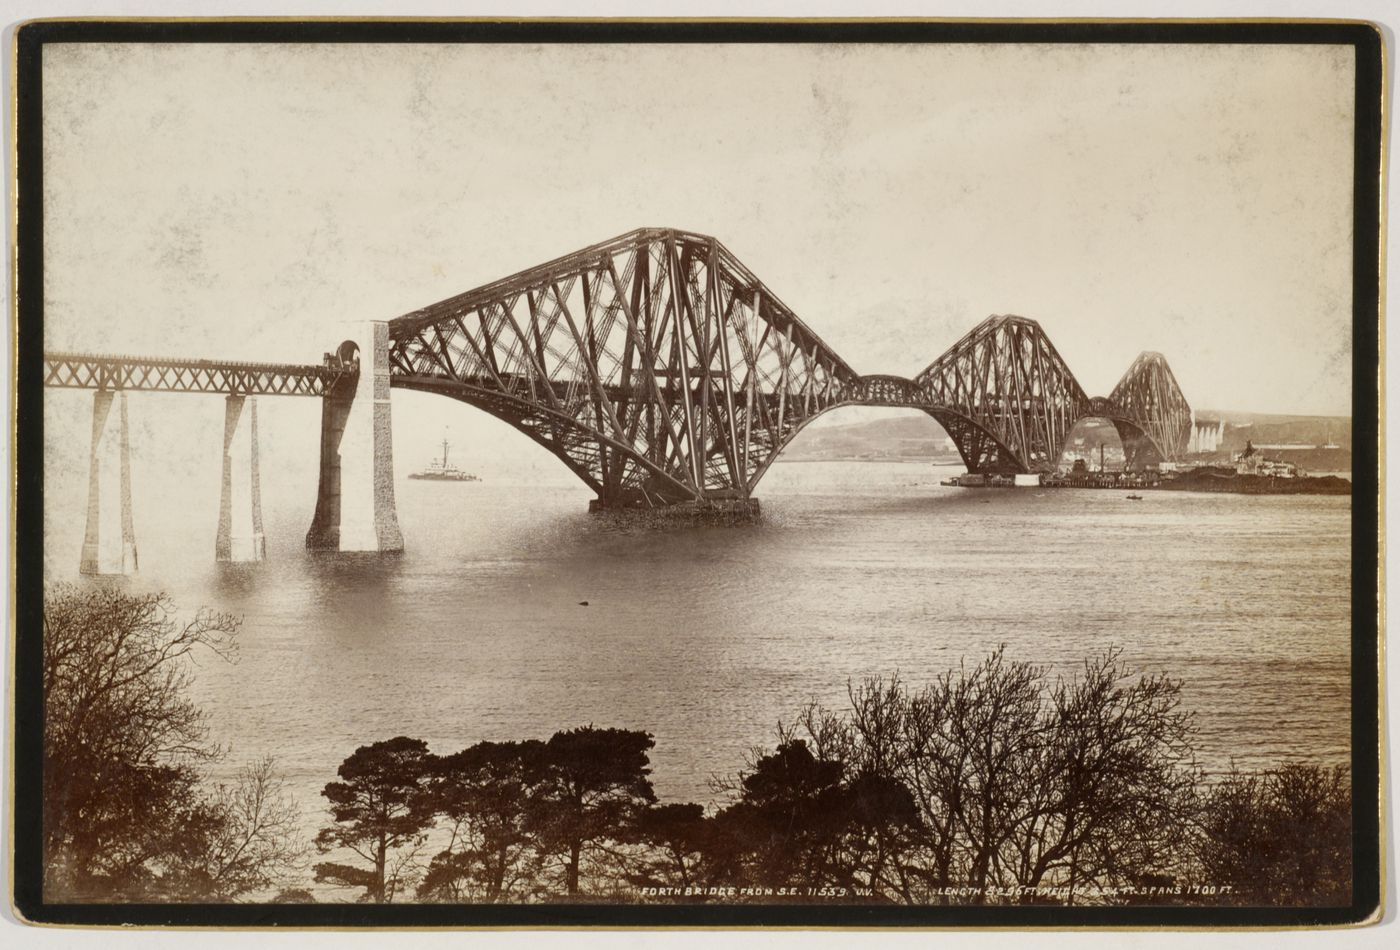 View of the completed Forth Bridge, Firth of Forth, Scotland